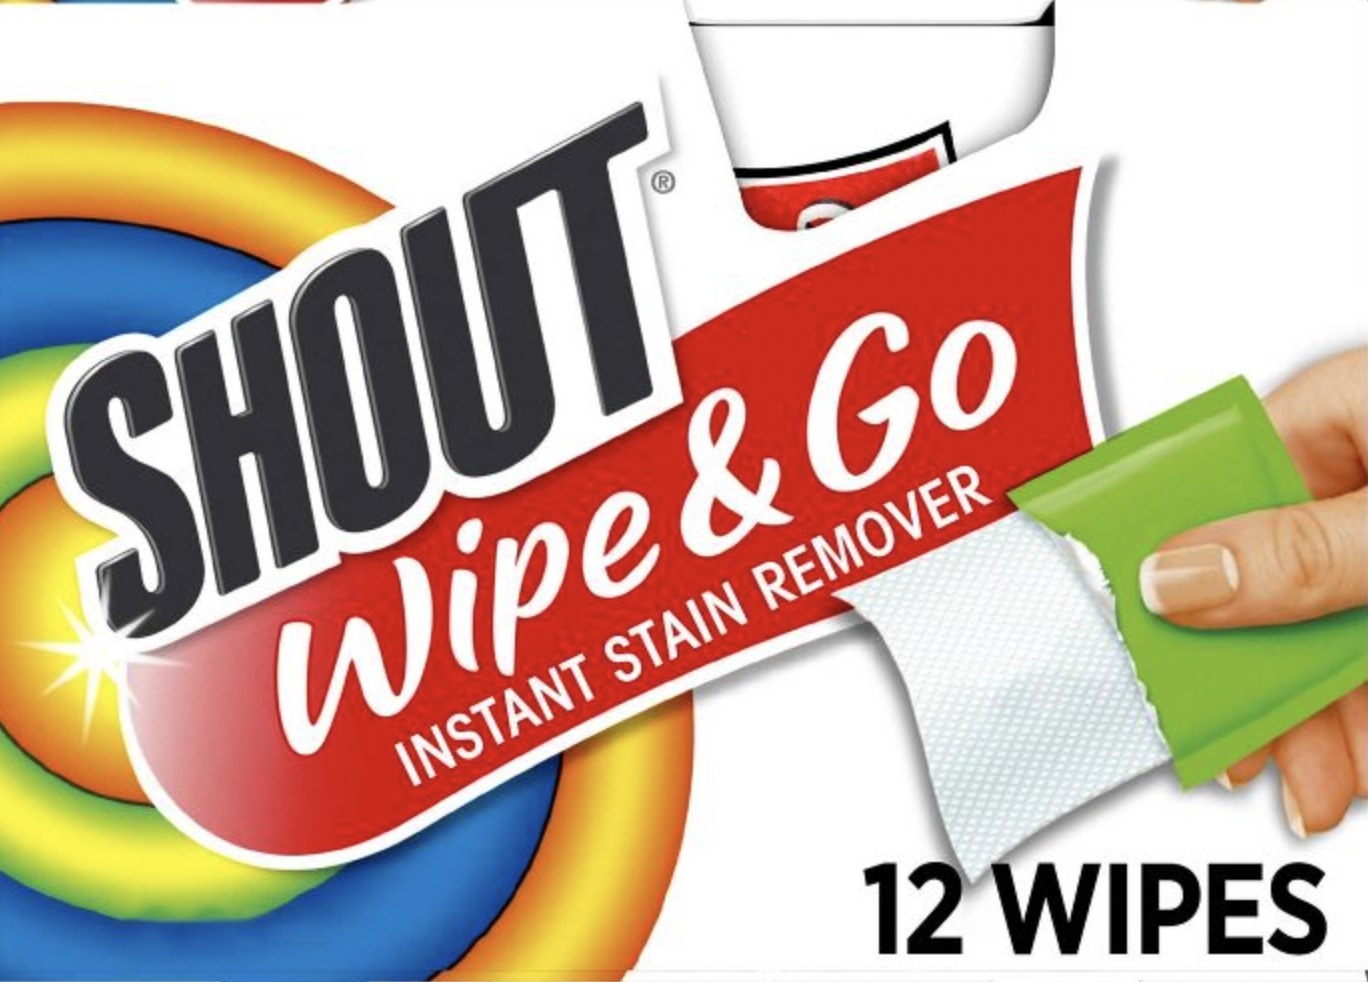 Shout stain remover wipes